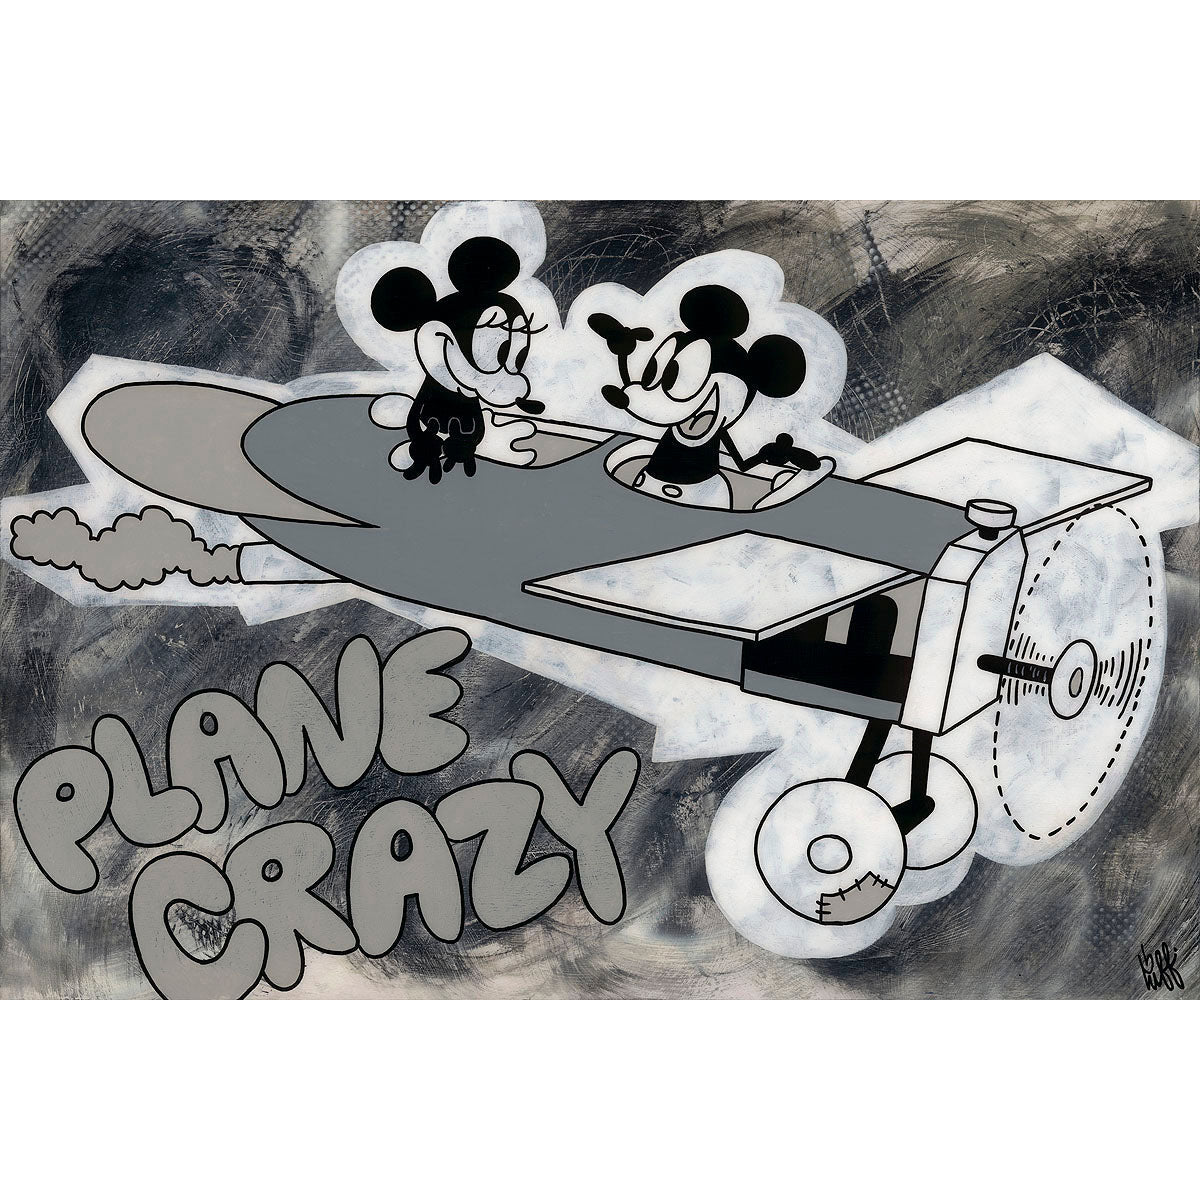 Beau Hufford Disney "Plane Crazy" Limited Edition Canvas Giclee